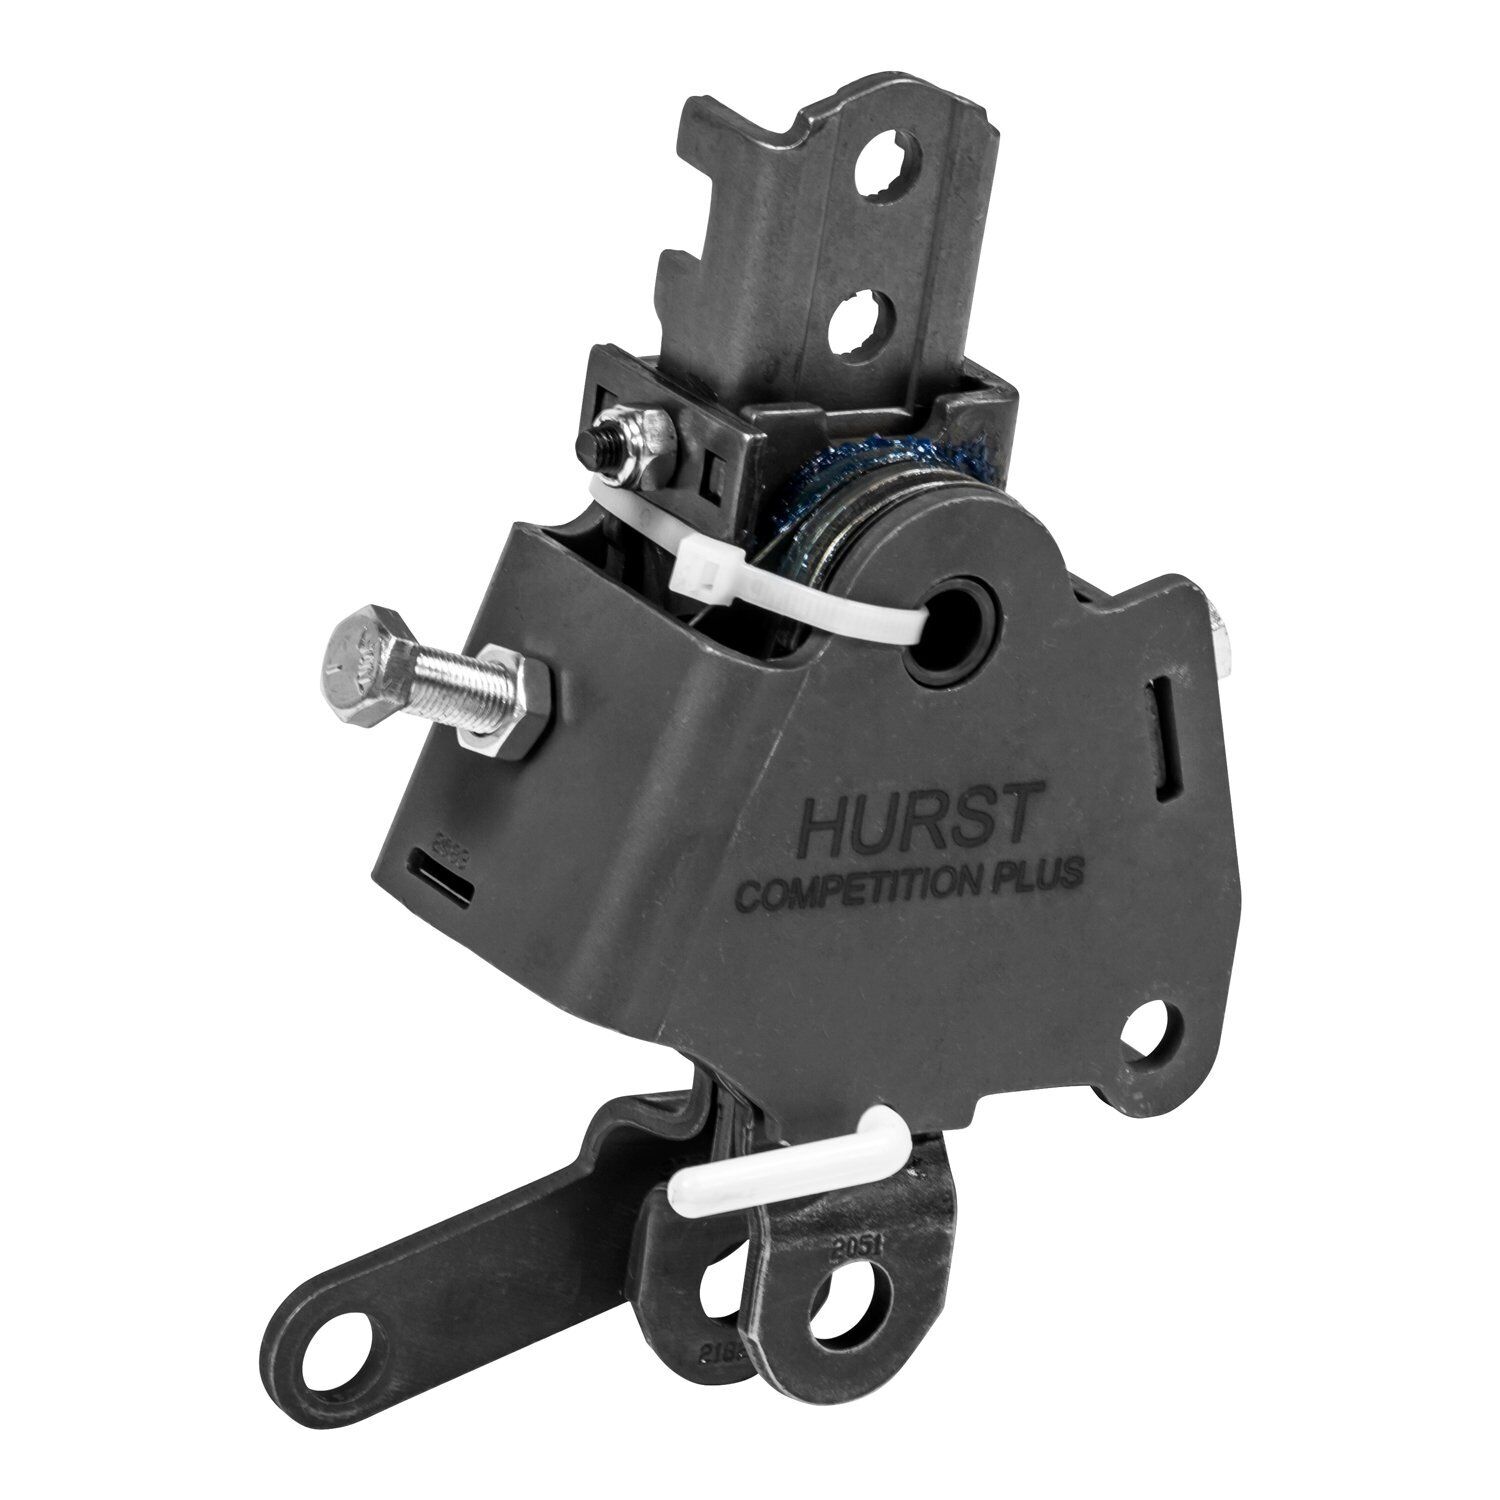 Hurst 3915405 Competition/Plus 4-speed Shifter Assembly